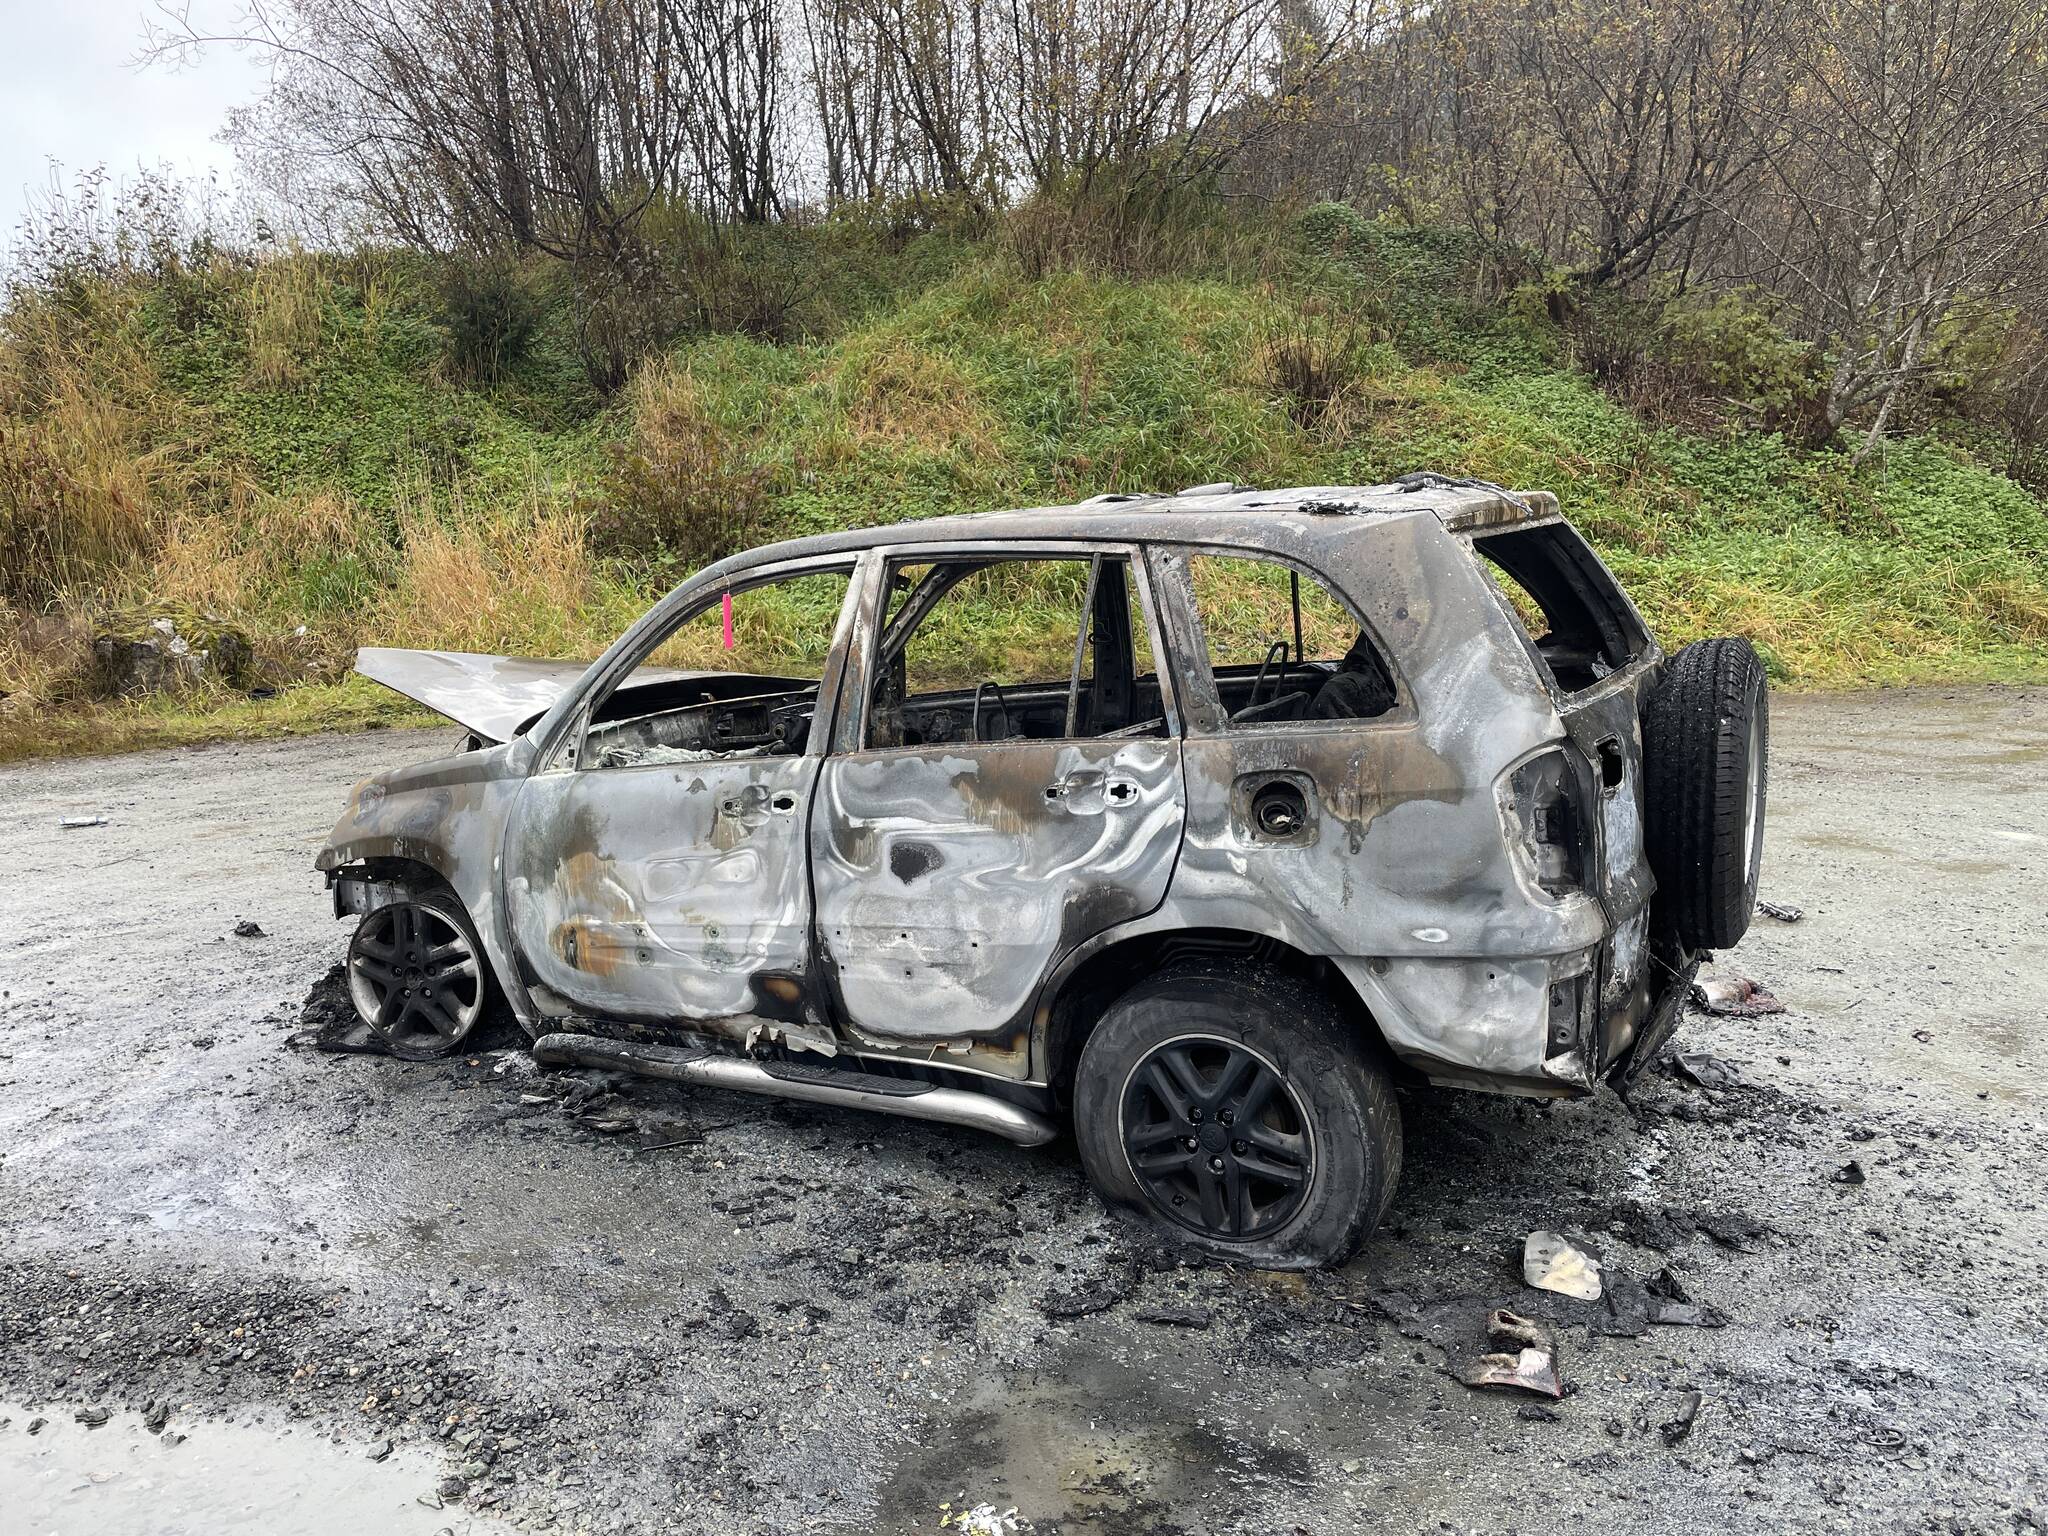 Capital City Fire/Rescue fire marshal Dan Jager said a vehicle on Valley Boulevard was destroyed early Wednesday morning in what appears to be an intentionally set fire, Oct. 20, 2021. (Michael S. Lockett / Juneau Empire)